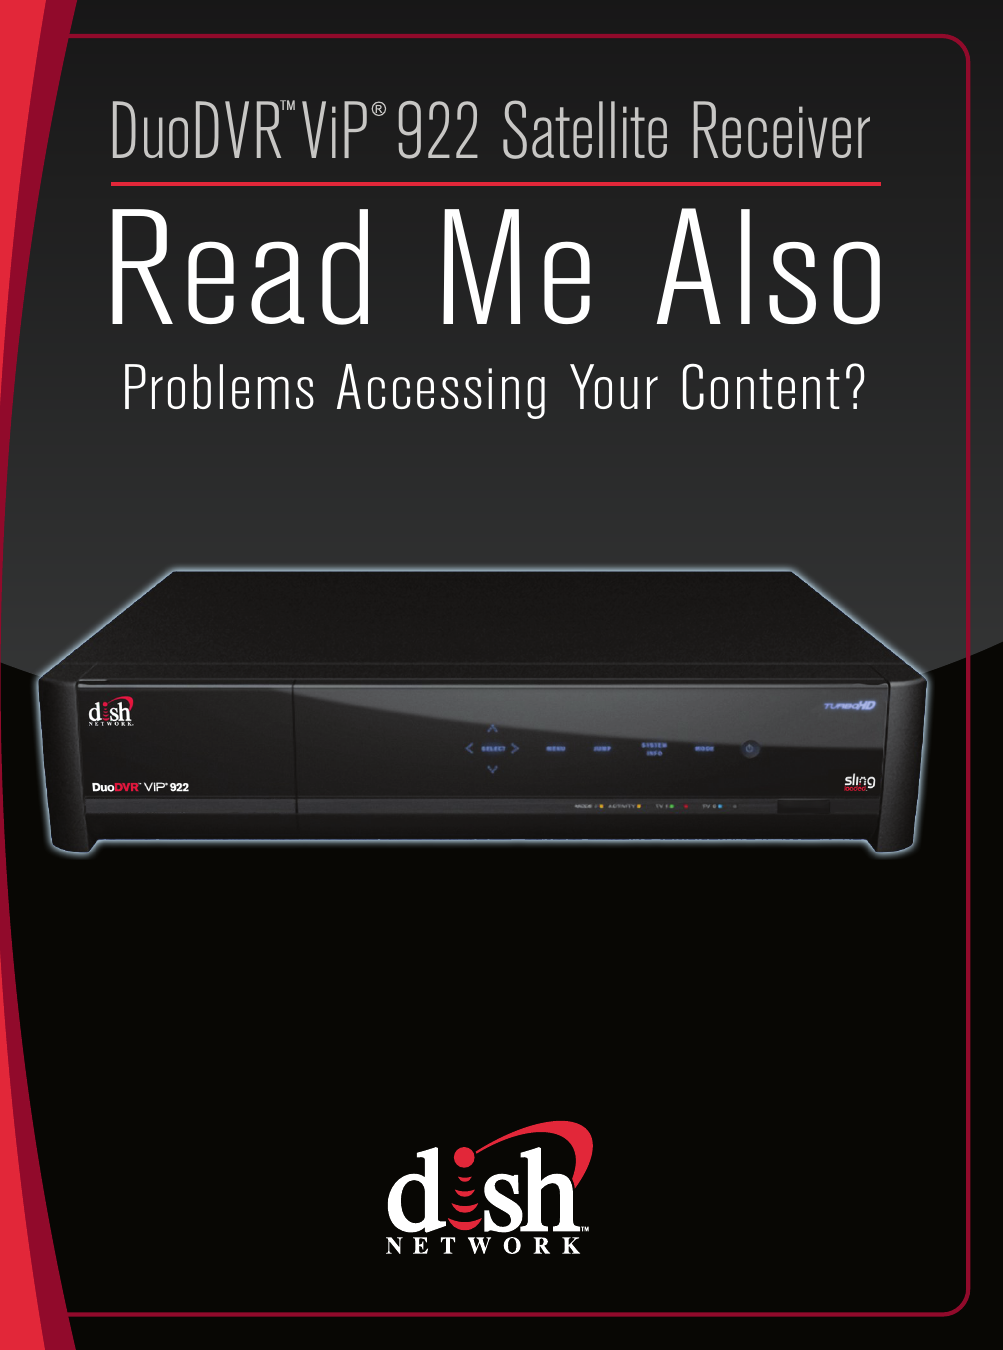 Read Me AlsoProblems Accessing Your Content?DuoDVR ViP 922 Satellite ReceiverTM